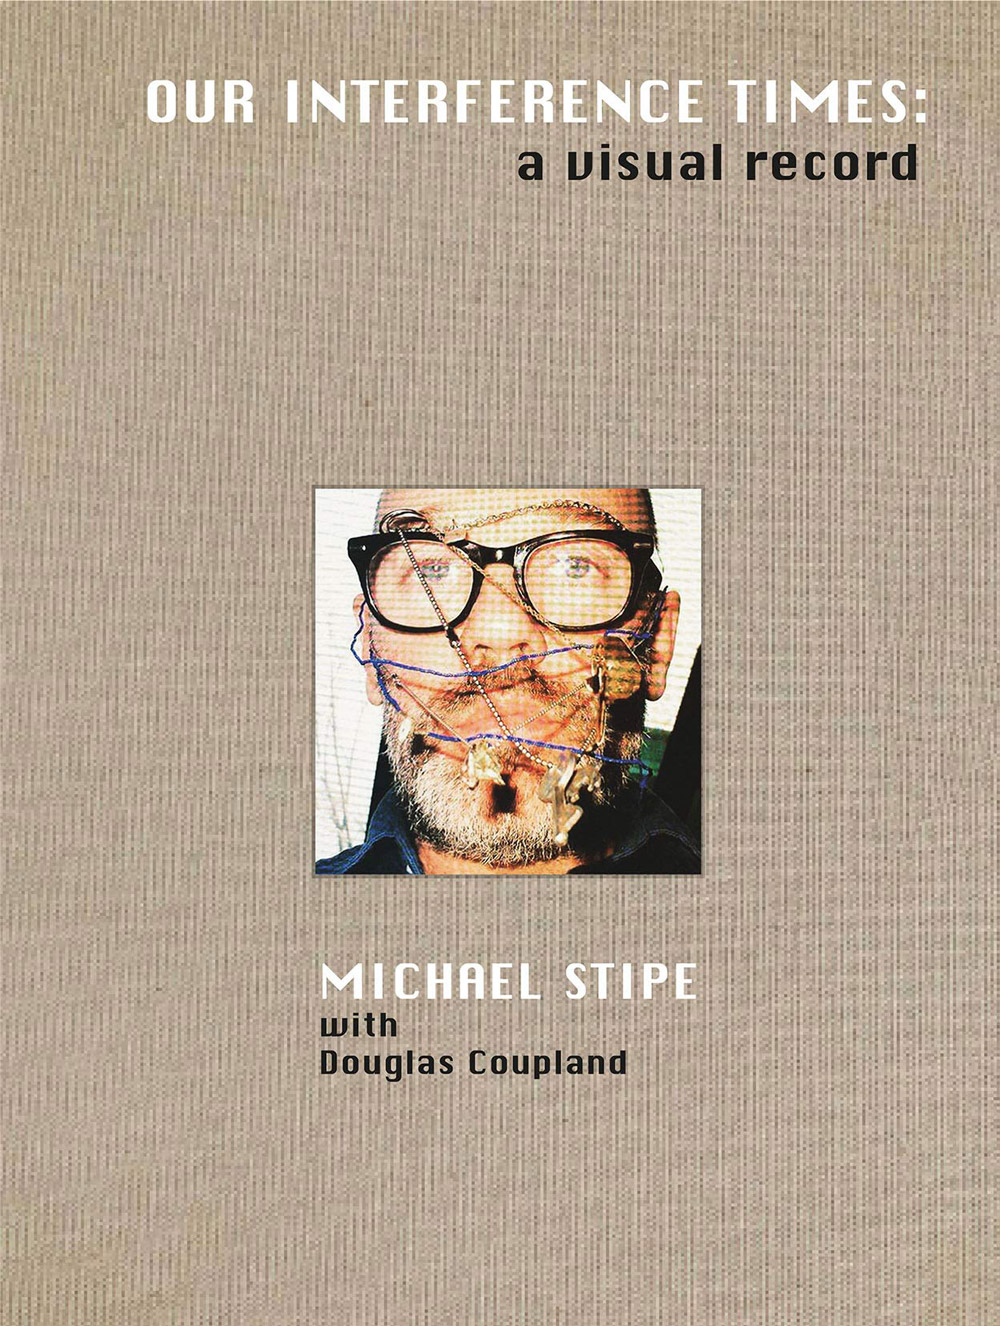 Michael Stipe's book: Our Interference Times: A Visual Record book cover